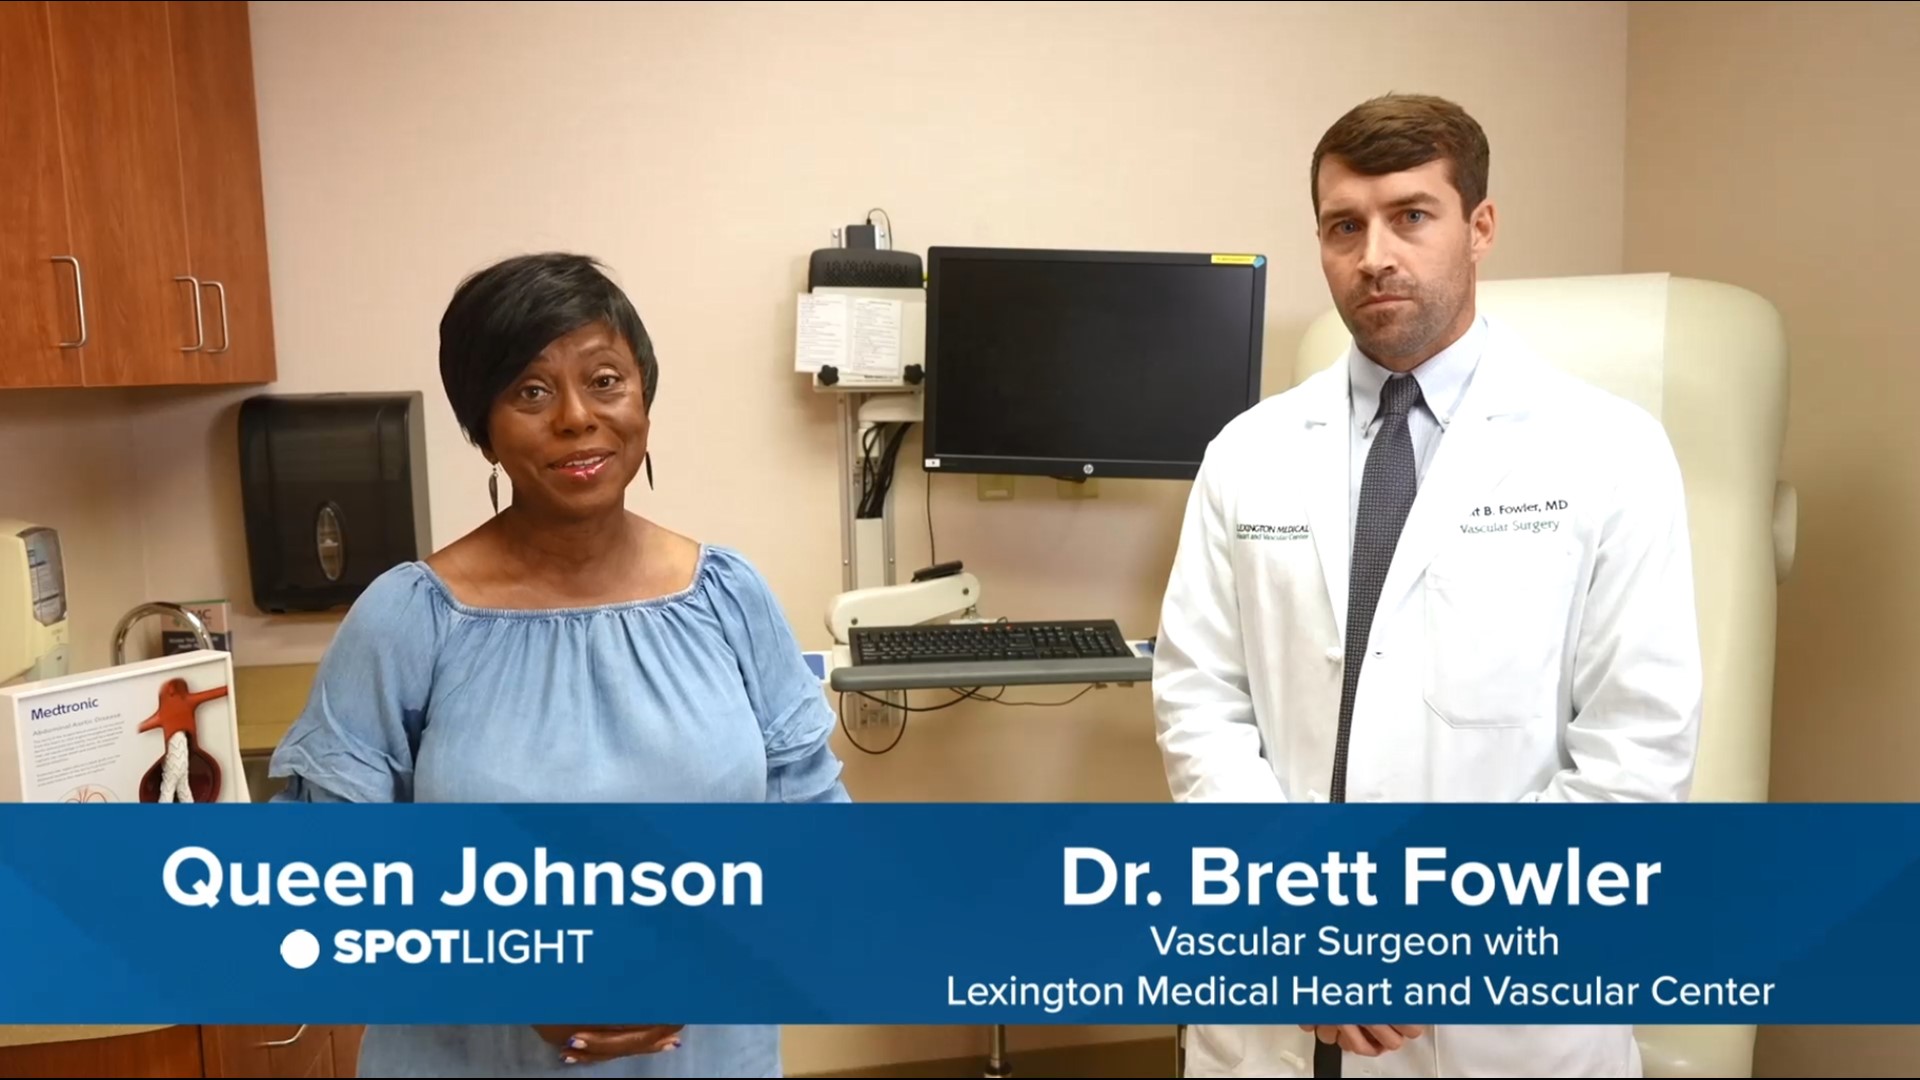 Dr. Brett Fowler, vascular surgeon with Lexington Medical Heart and Vascular Center, talks about diabetes, its complications and high prevalence in South Carolina.